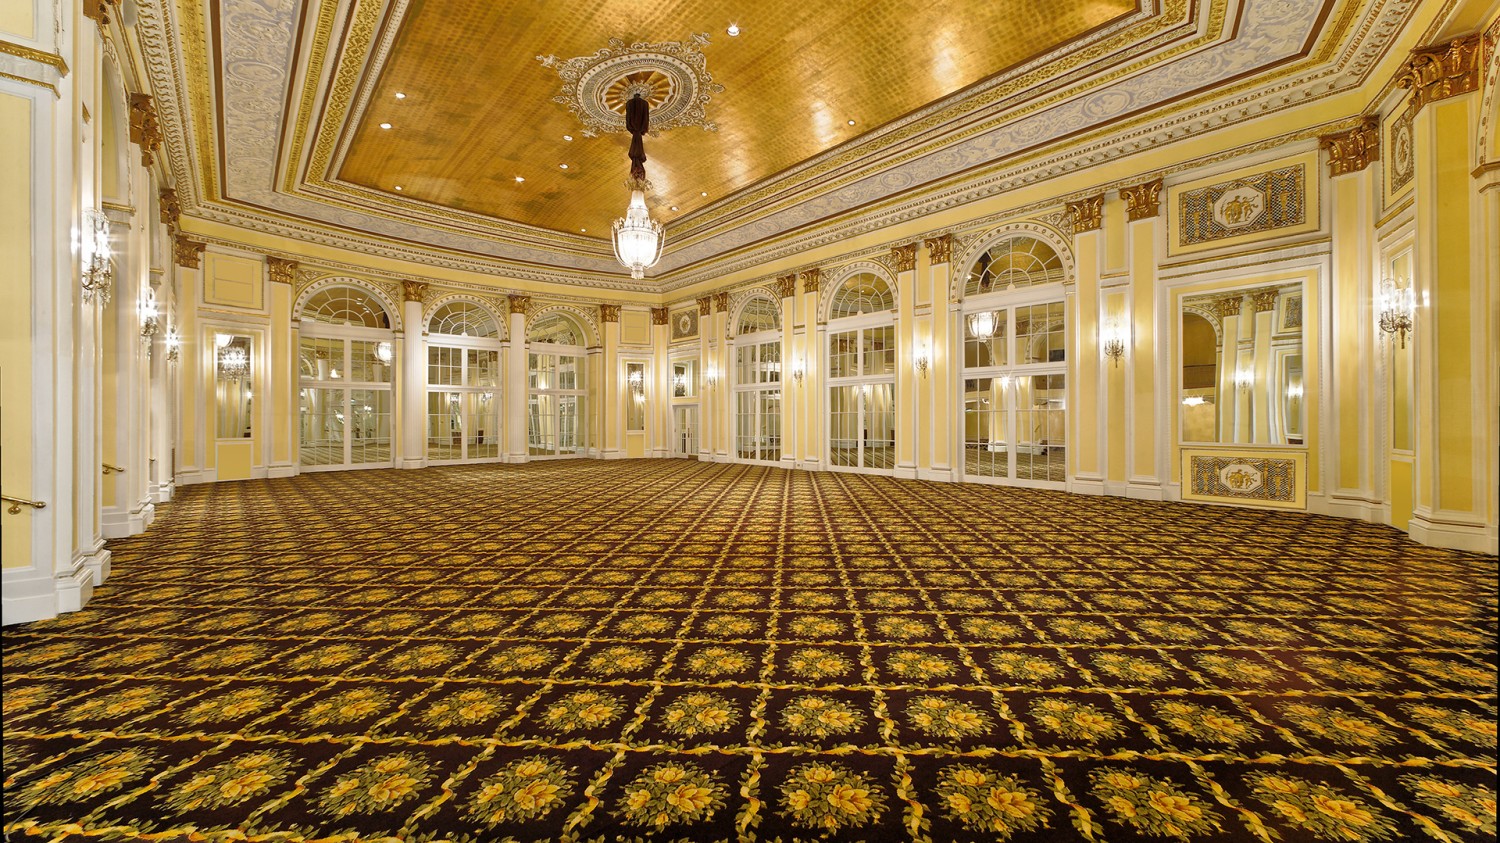 Amway Grand_Pantlind Ballroom_Empty_Mirrors_Gold Ceiling_Chandelier